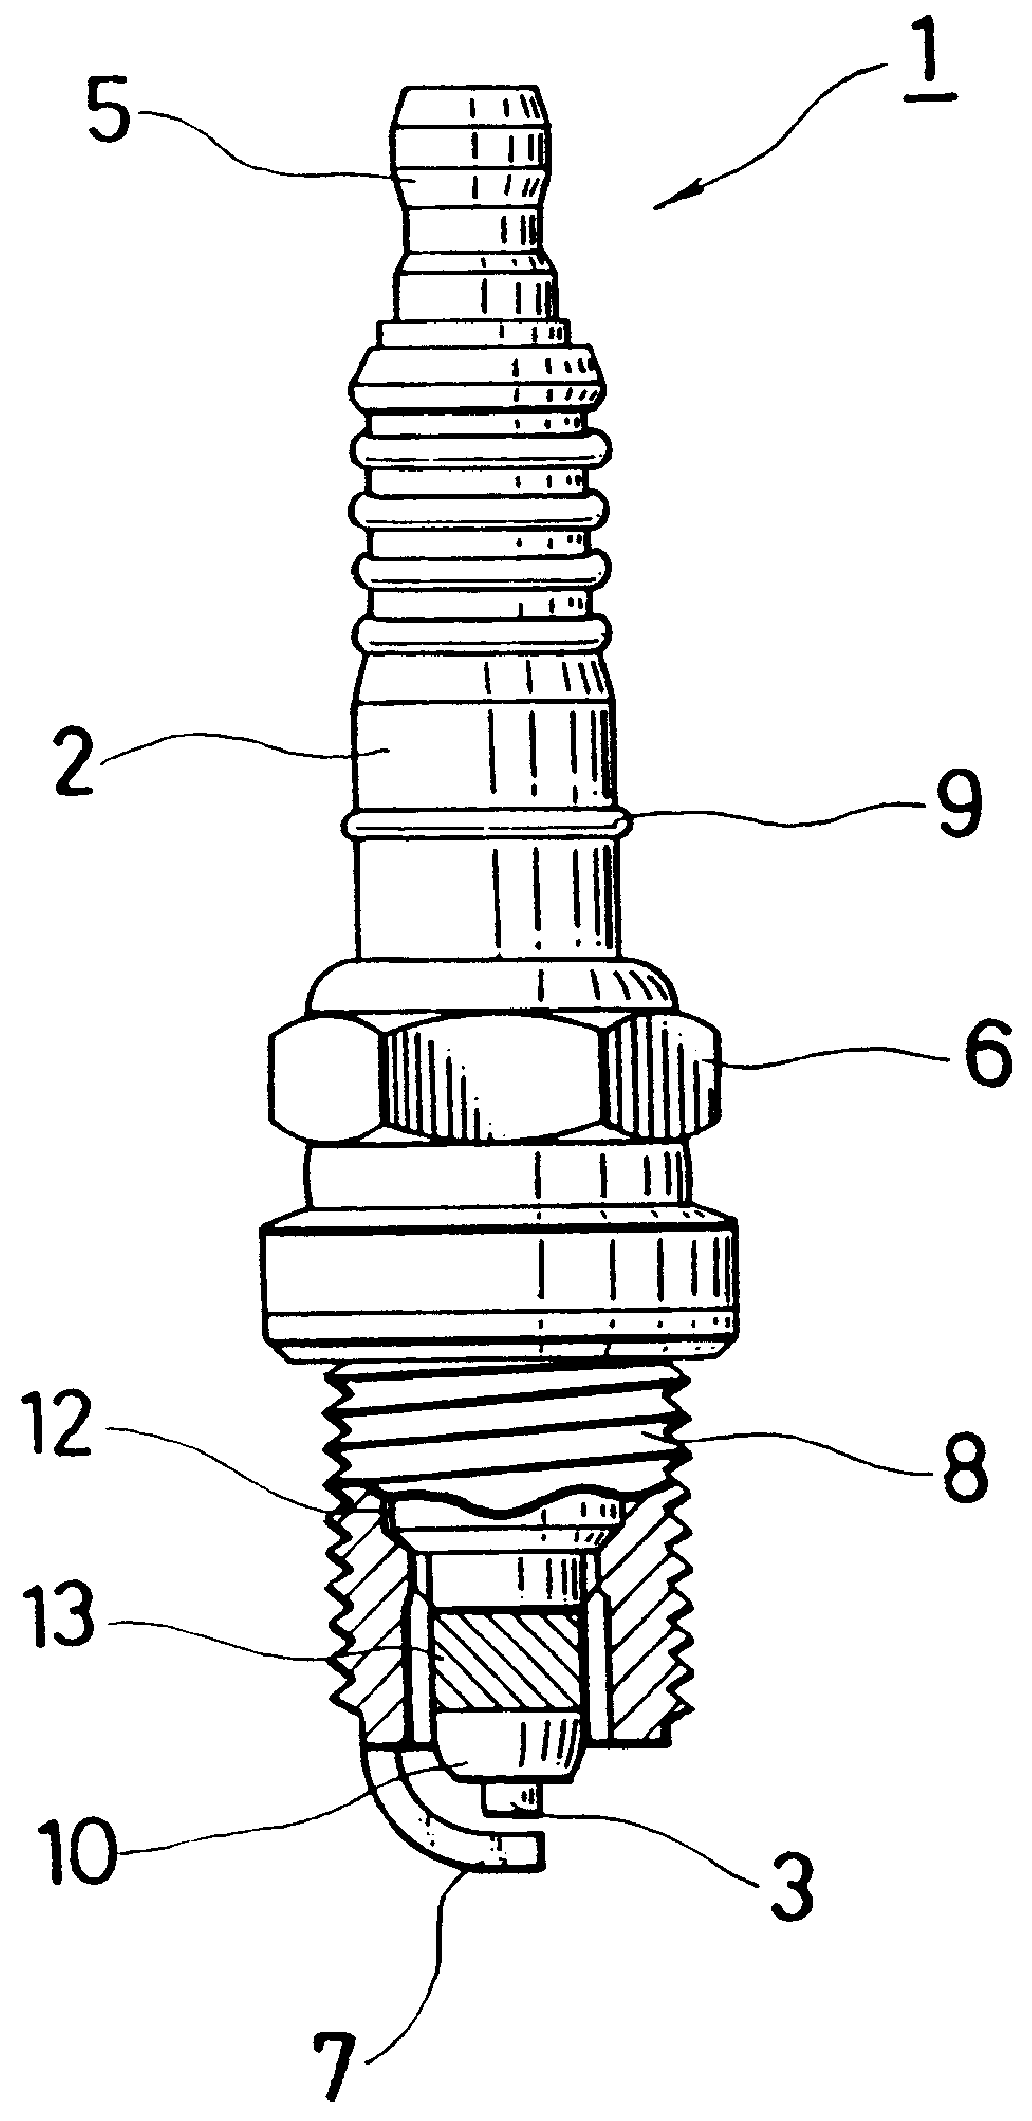 Heater equipped spark plug